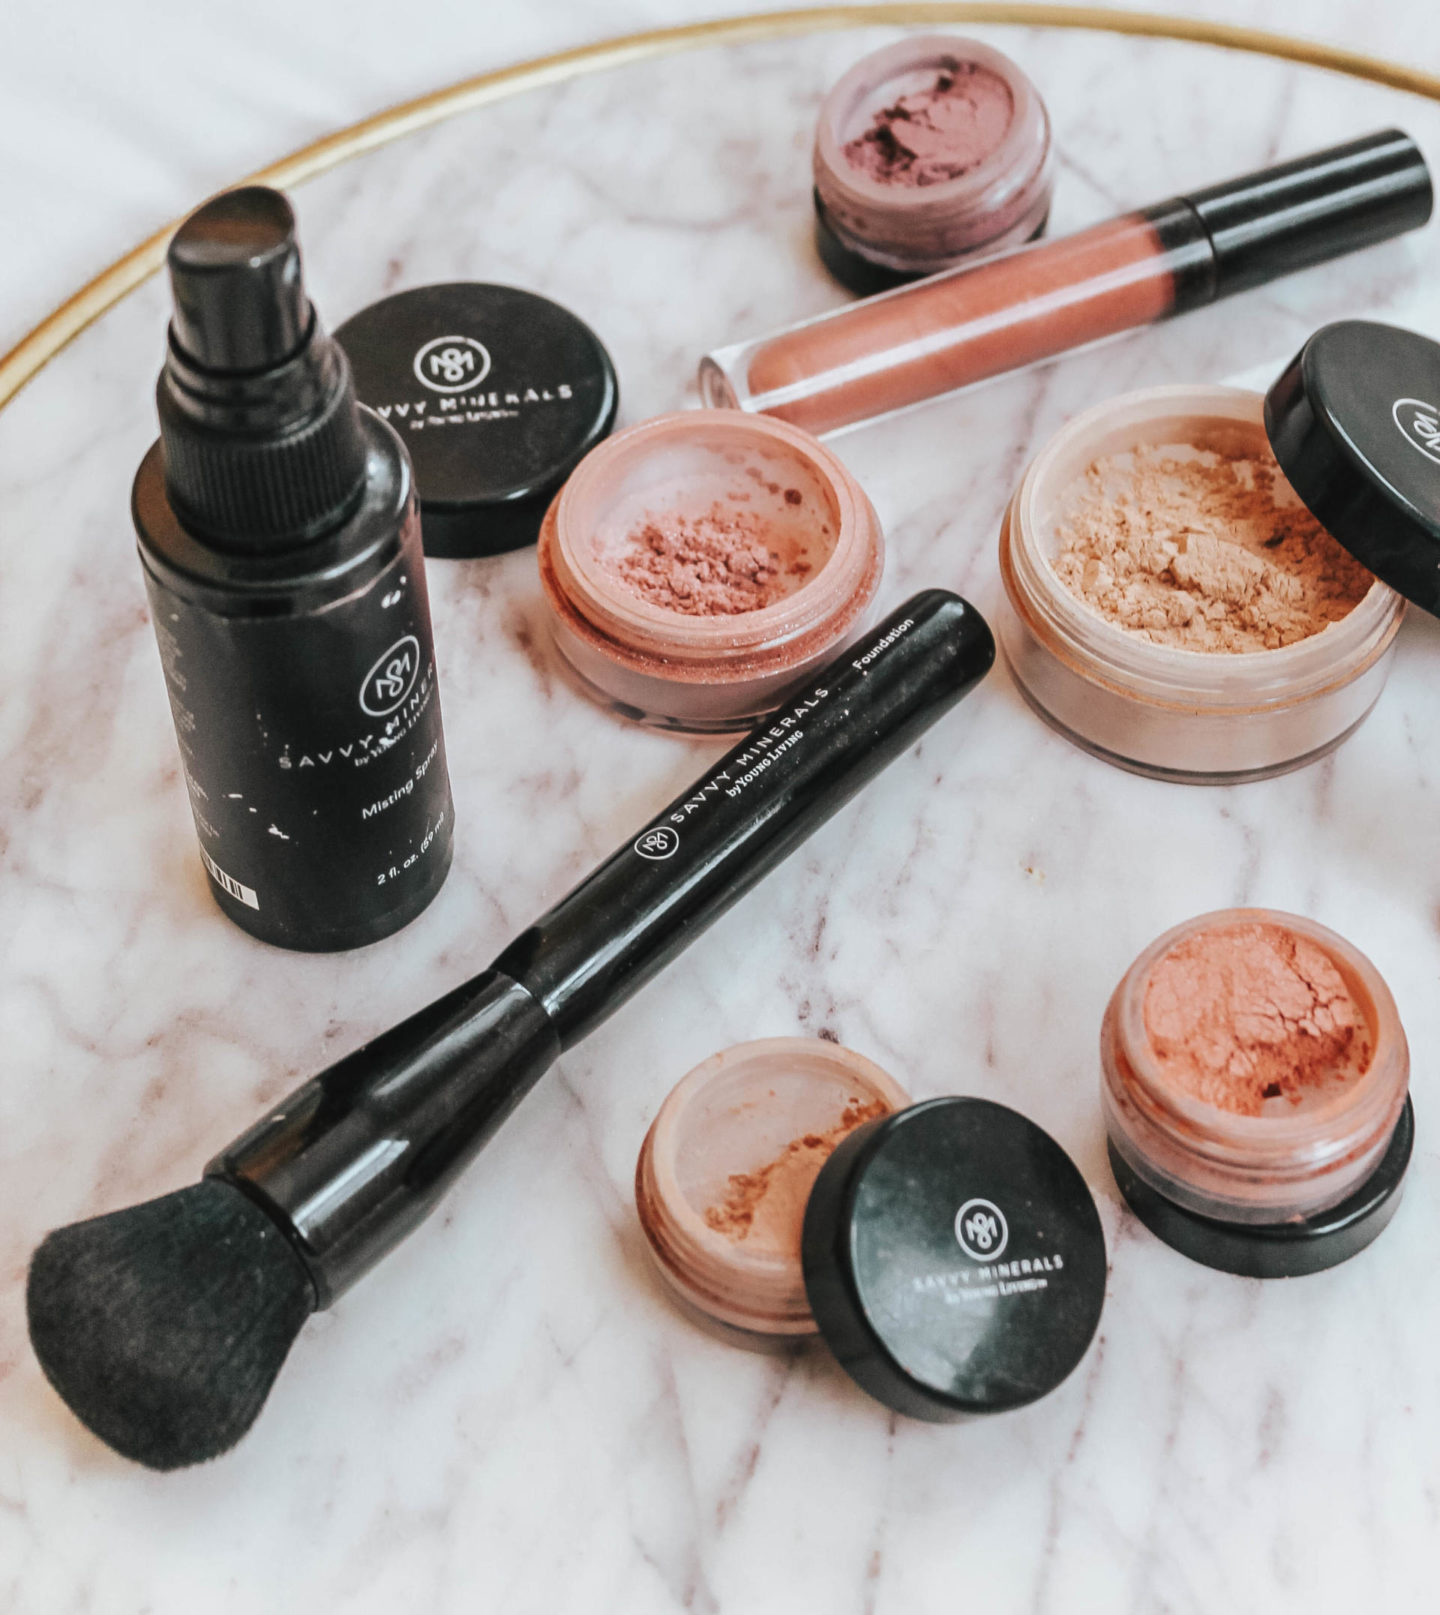 Savvy Mineral Makeup
Clean Beauty